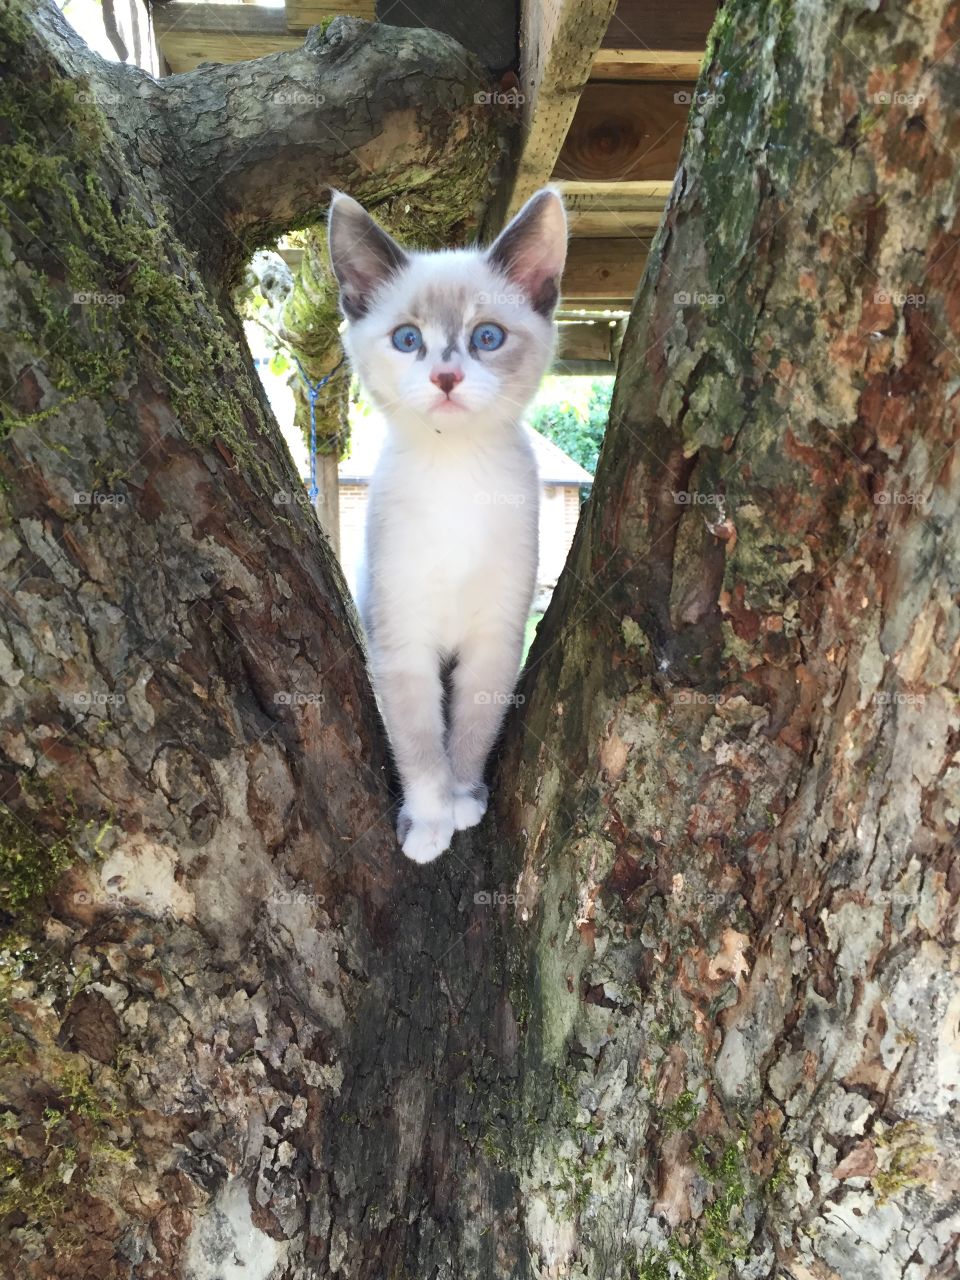 Scout 'scouting' in the tree!